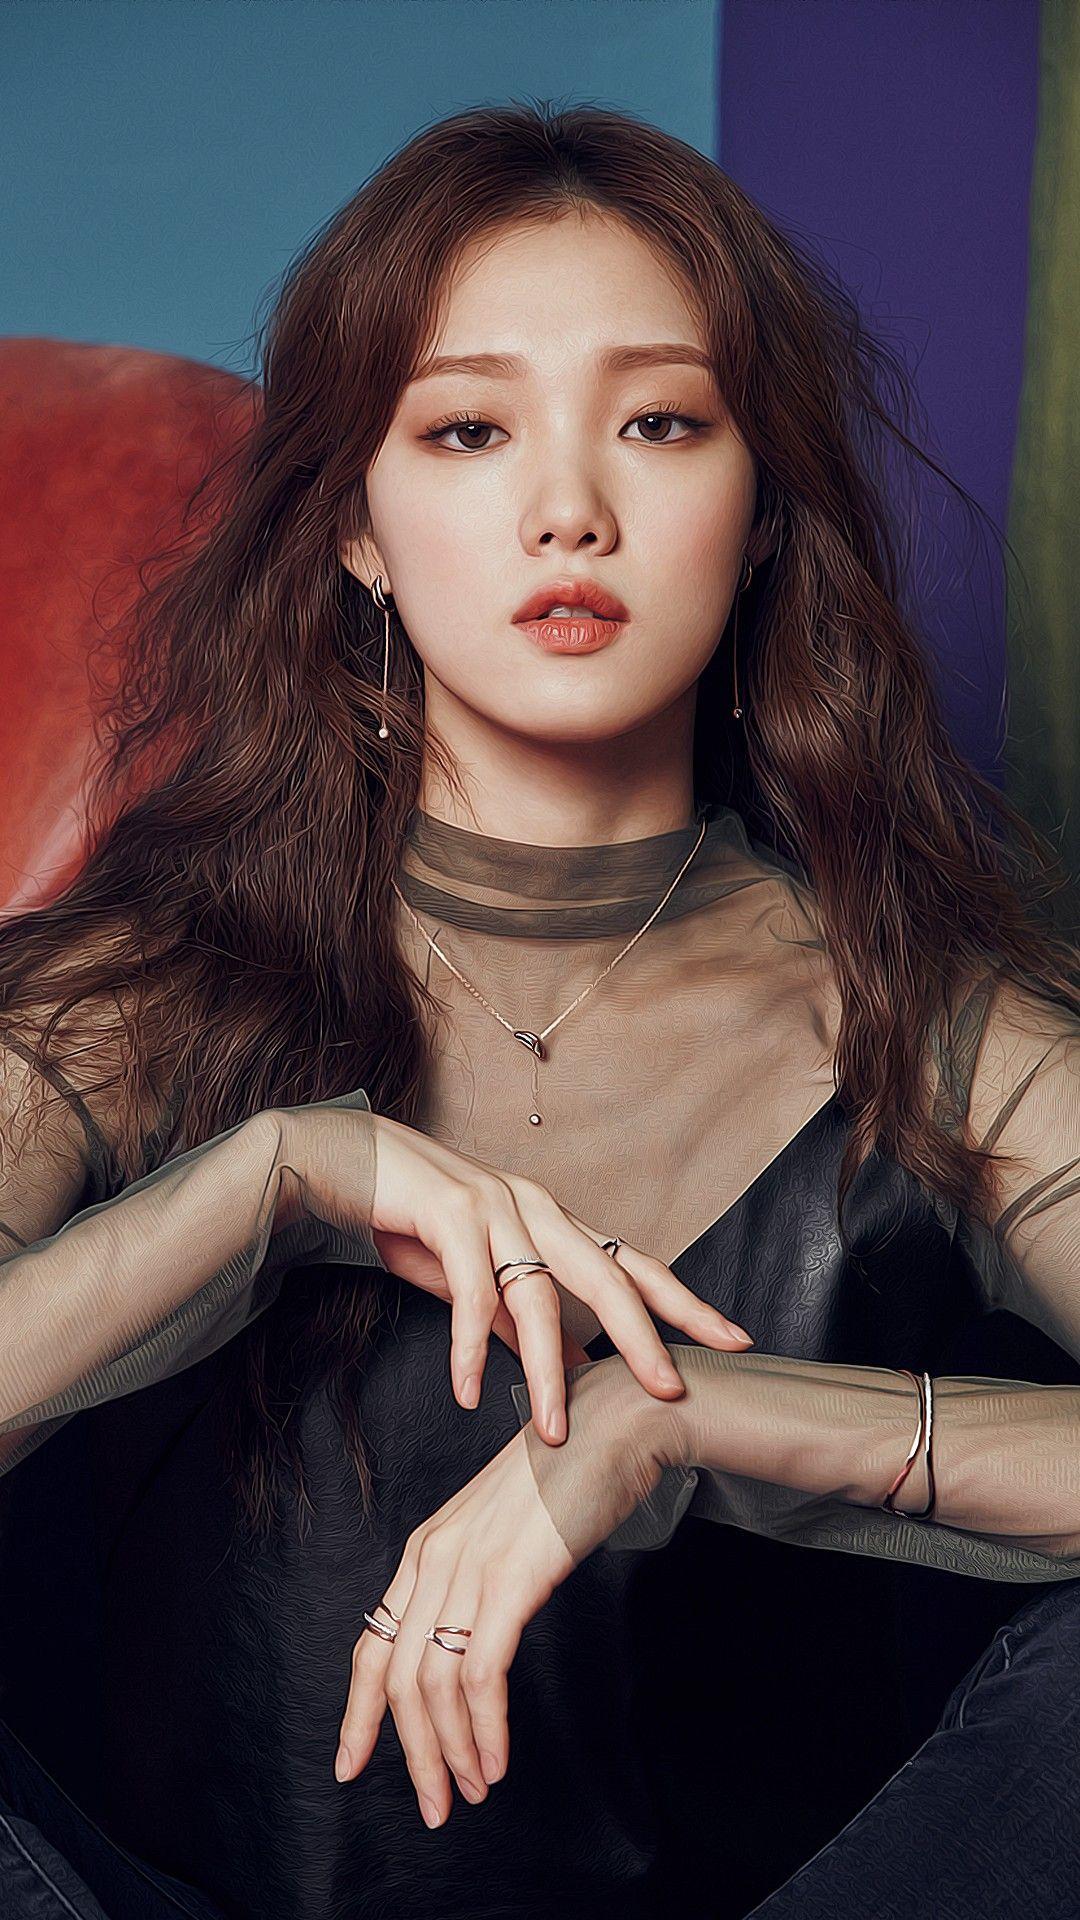 Sung kyung lee Lee Sung